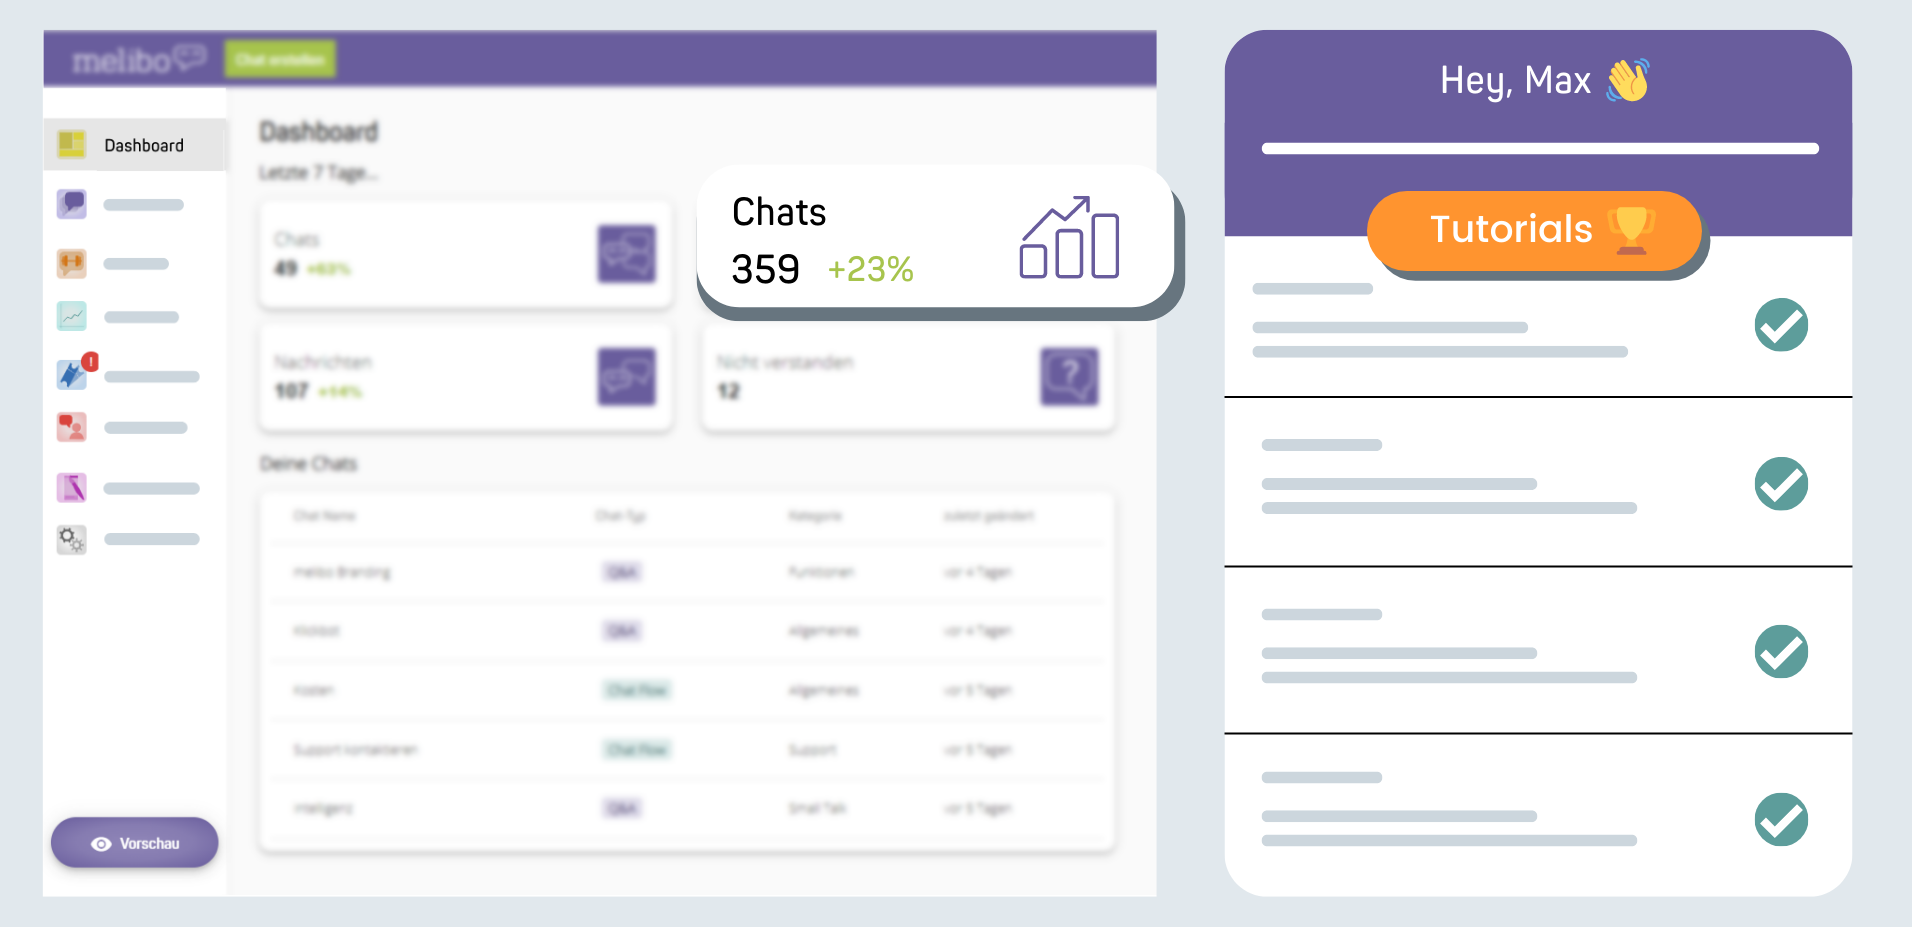 Dashboard - find an overview of your insights, your chats and helpful tutorials